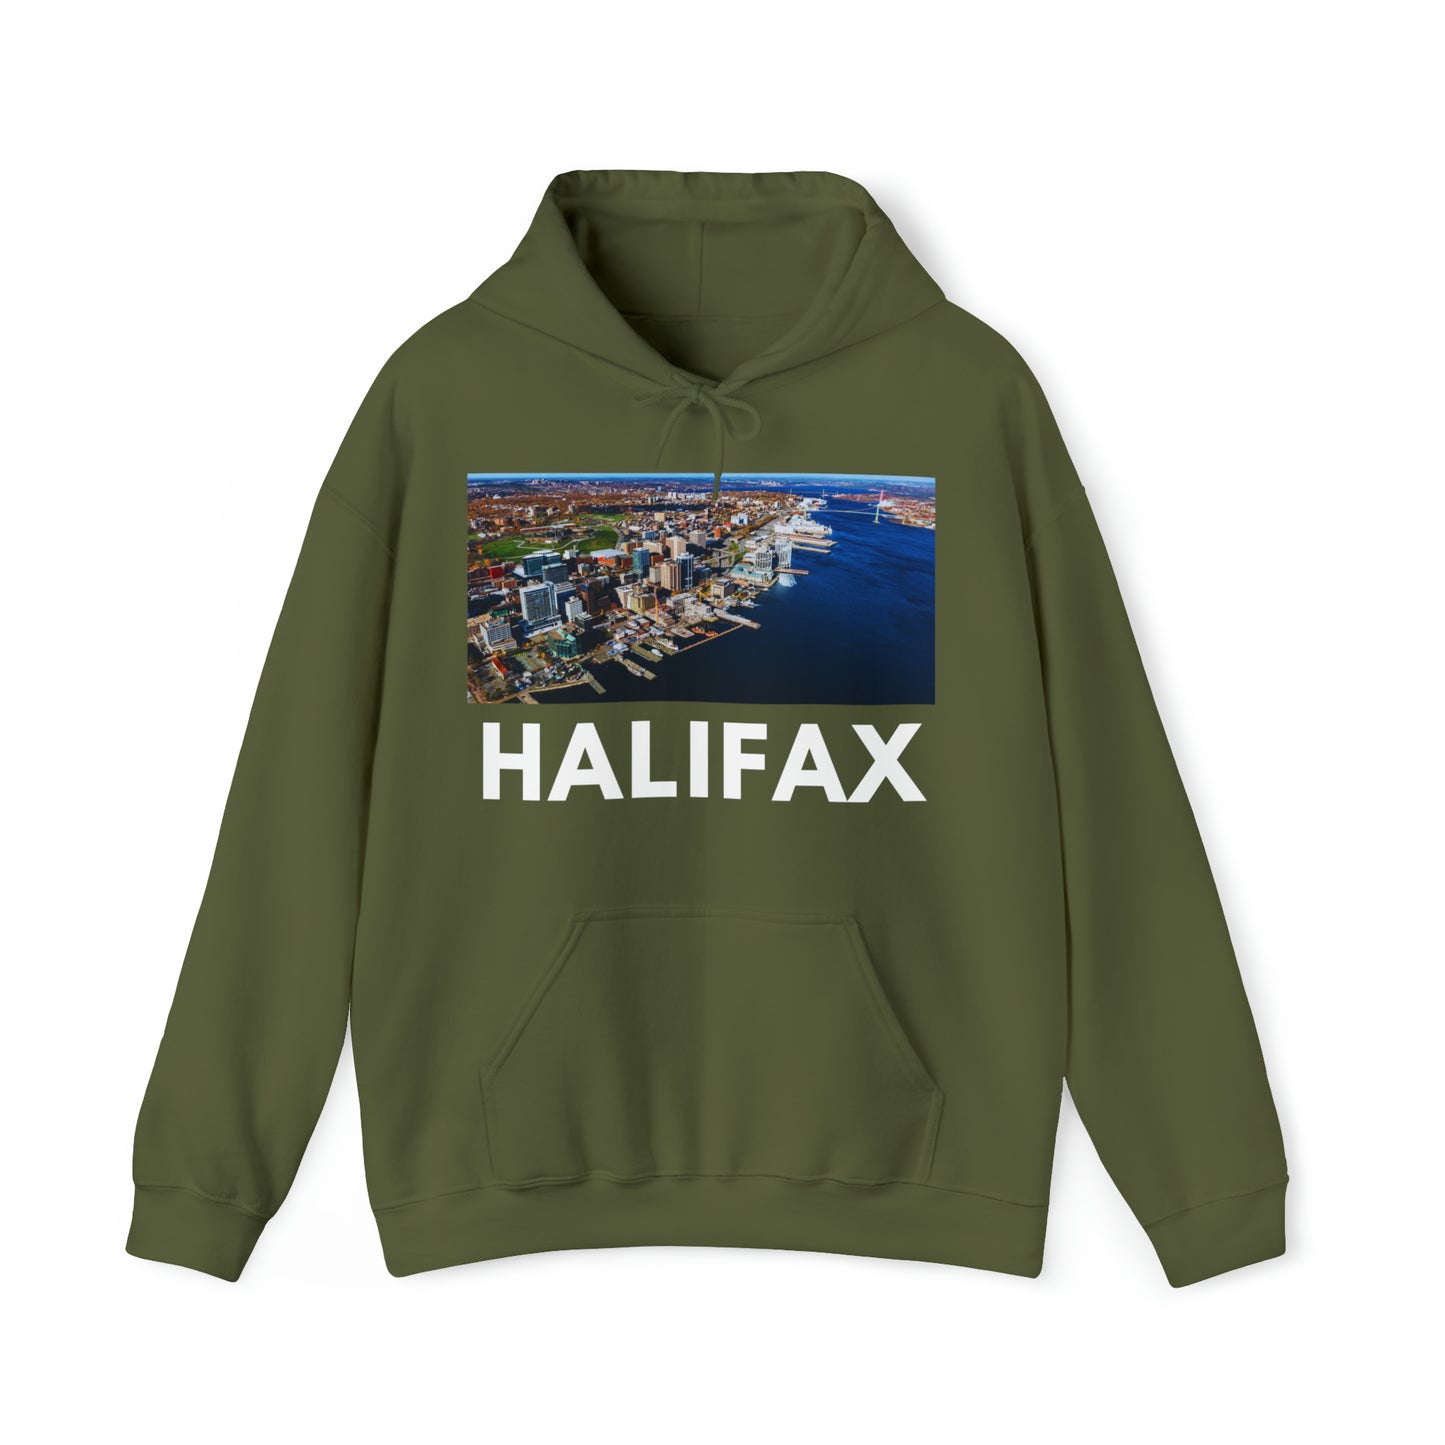 S Military Green Halifax Hoodie: The Waterfront from HoodySZN.com